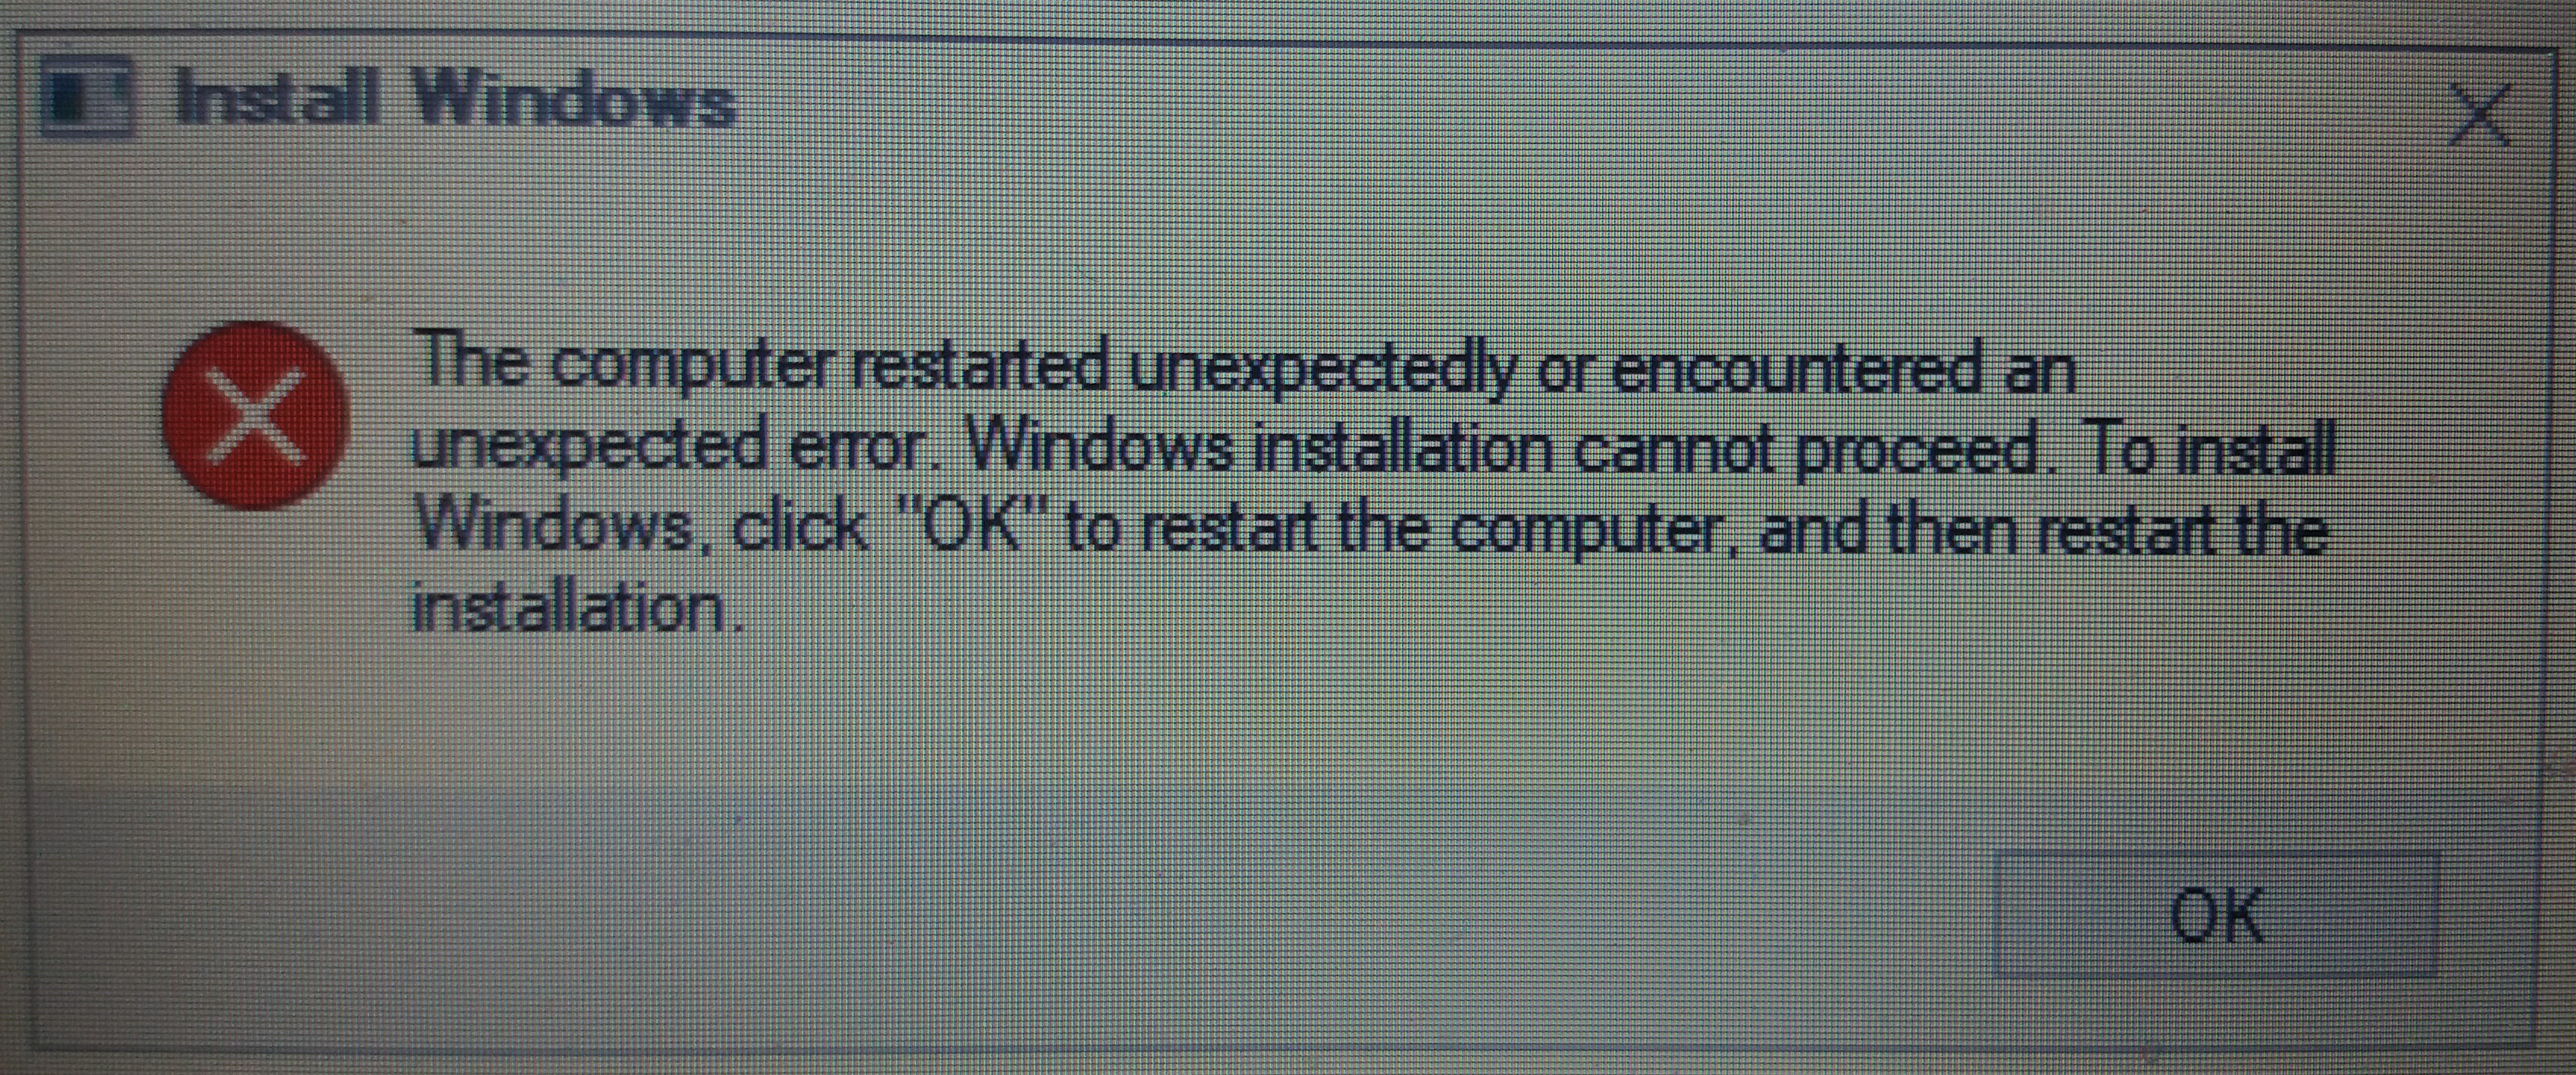 Image Install Windows The Computer restarted Unexpectedly or encountered as unexpected error. click OK to restart